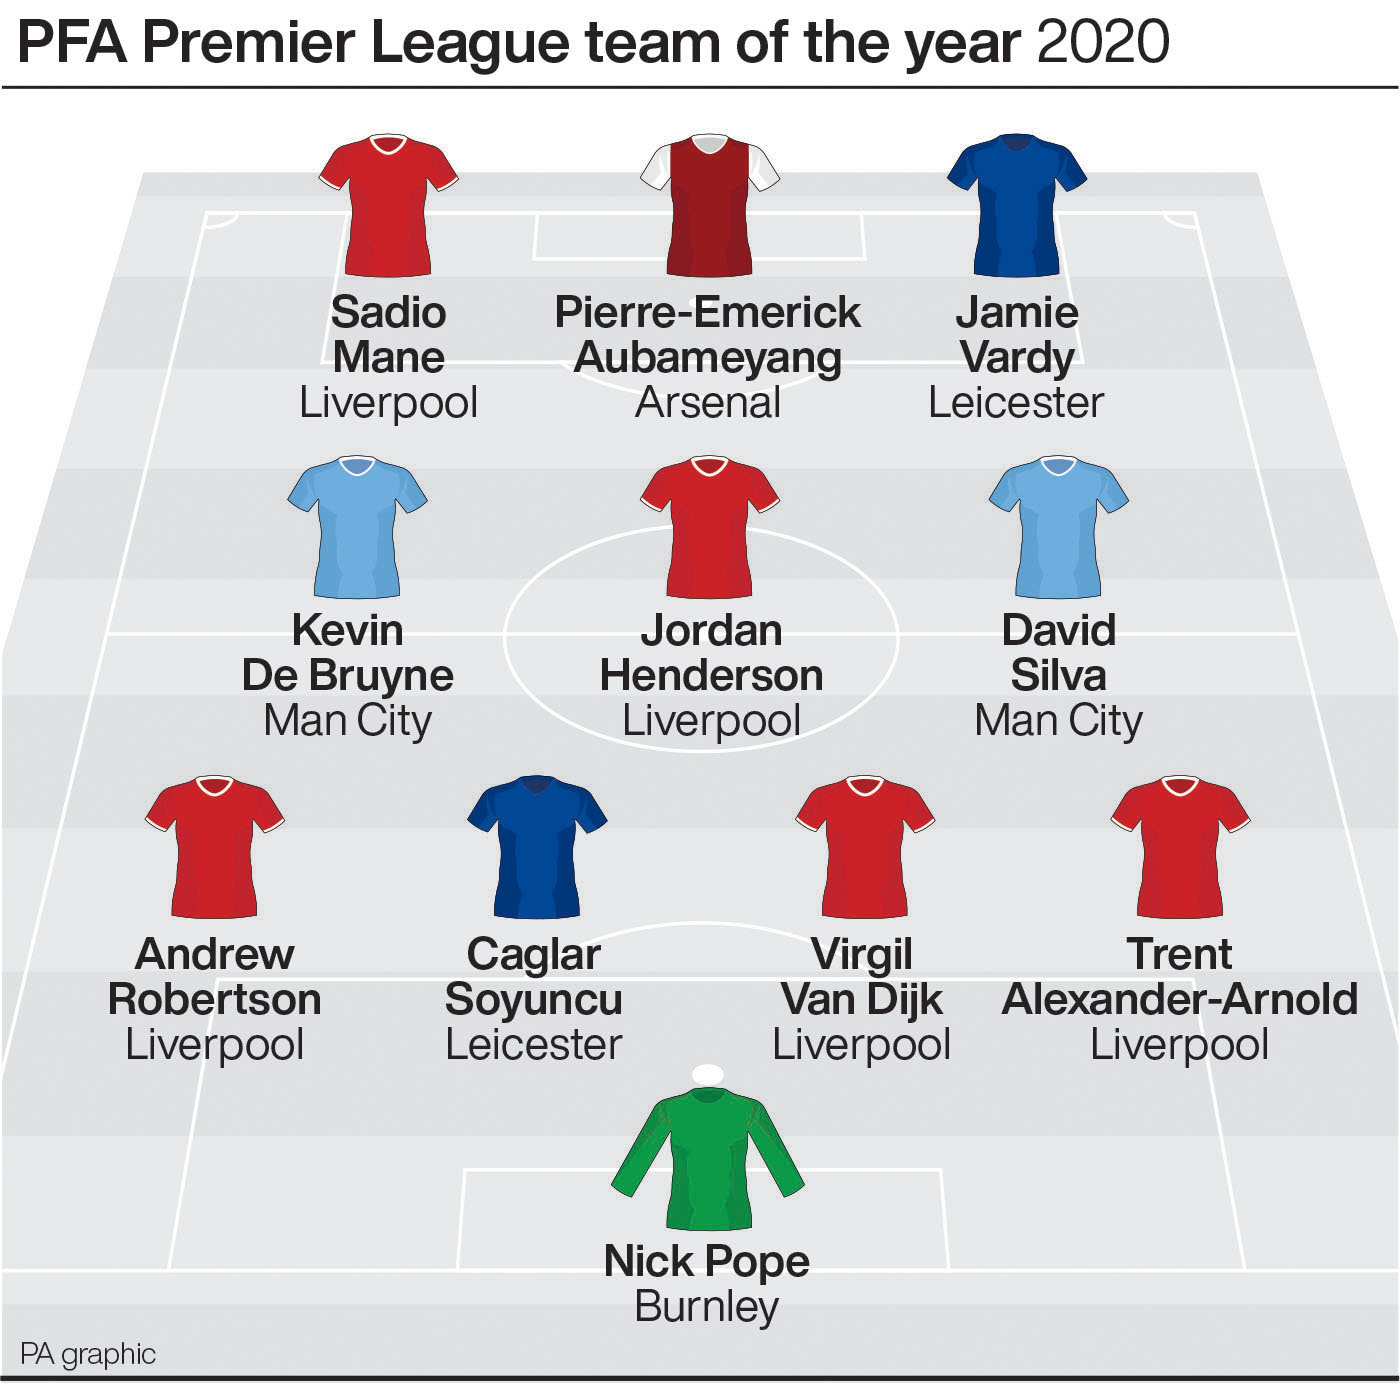 Jordan Henderson among five Liverpool players in PFA team of the year